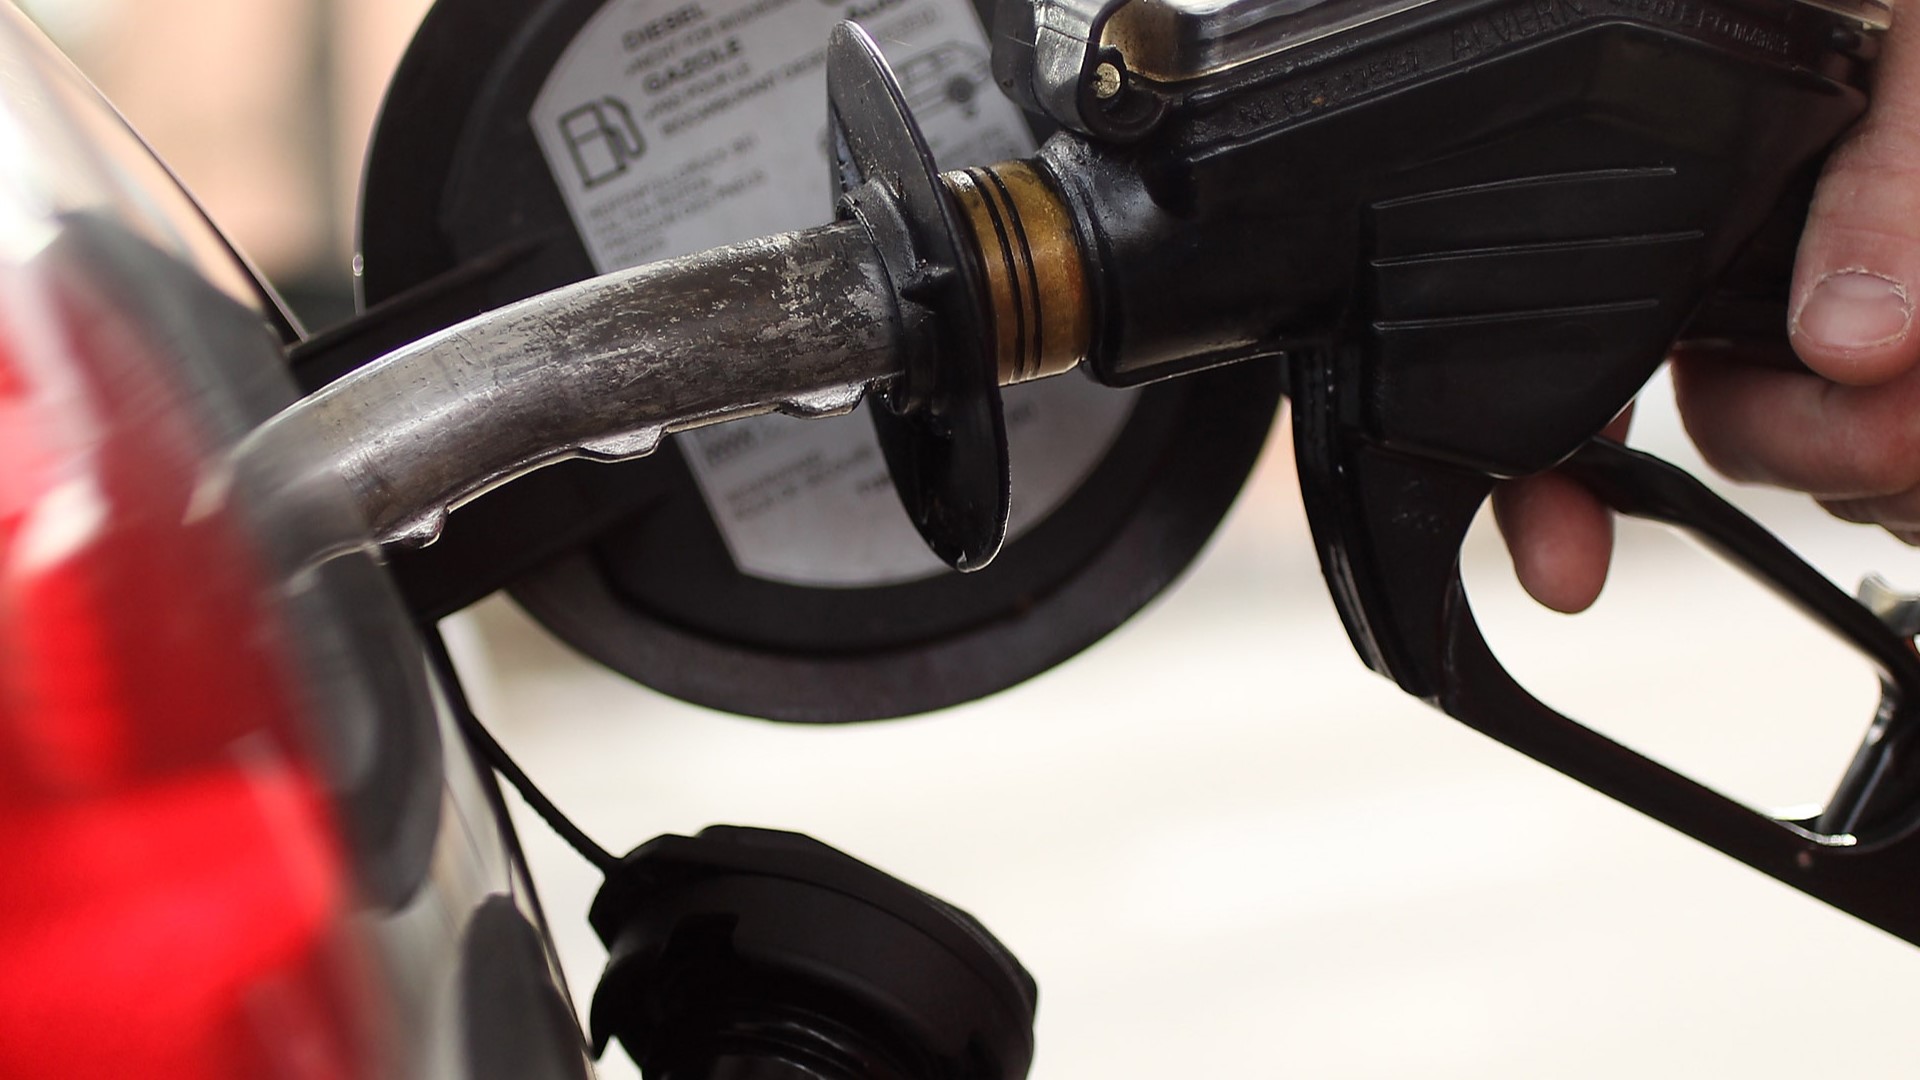 The Lundberg survey says the average price for a gallon of regular is up two cents over the last two weeks to 3.22 a gallon. Prices in Kentuckiana are below $3.